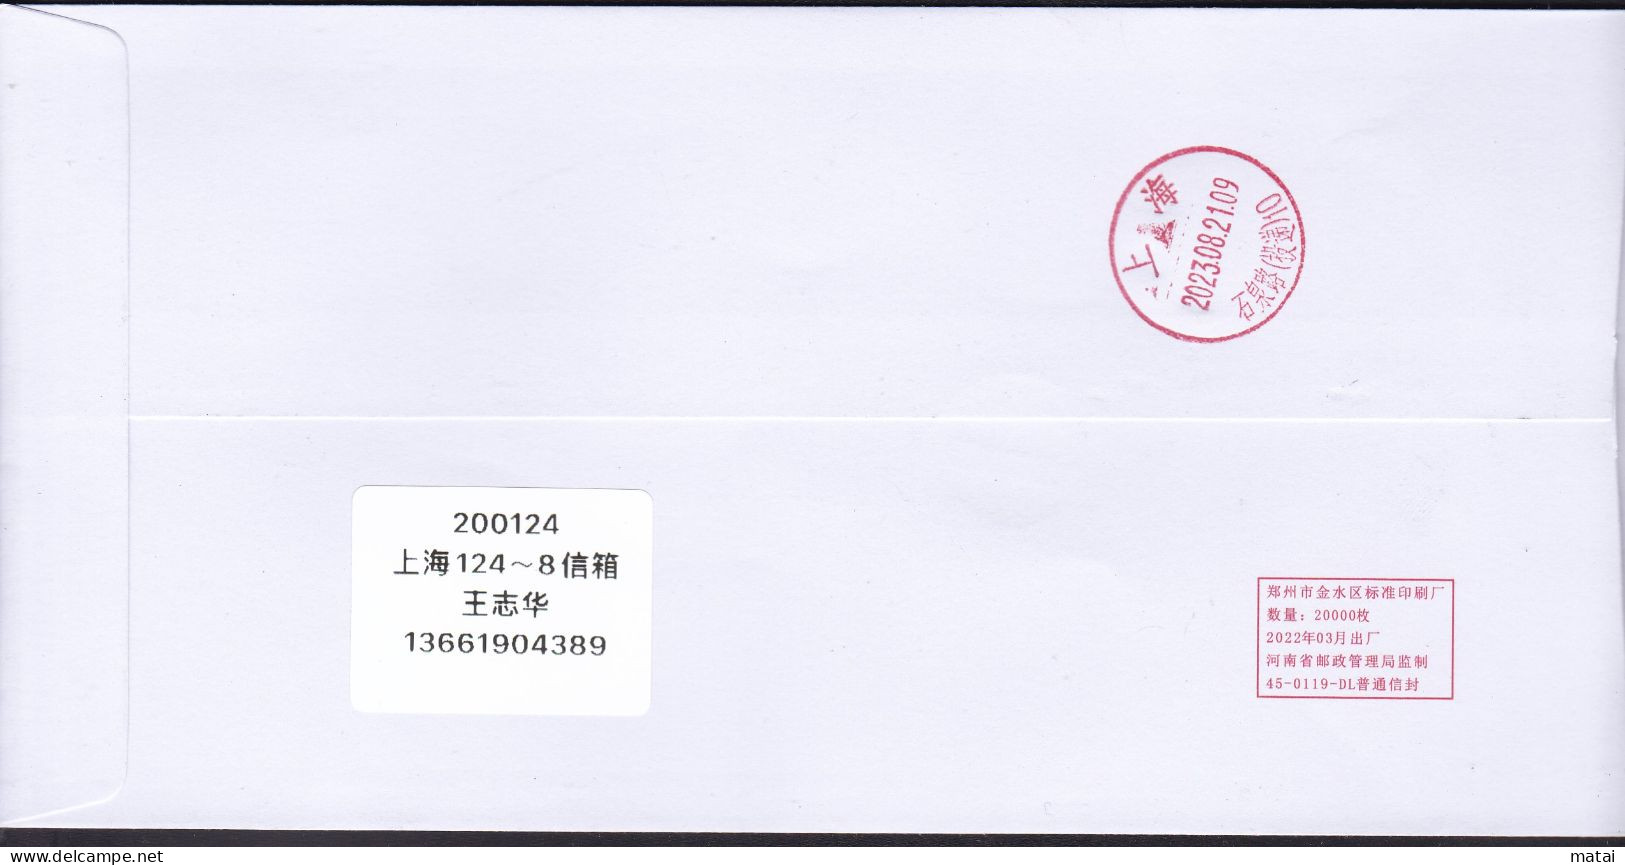 CHINA CHINE CINA  2023.08.19 SHANGHAI Nucleic Acid Test F.D.COVER WITH METER STAMP 0.80 YUAN - Mandschurei 1927-33